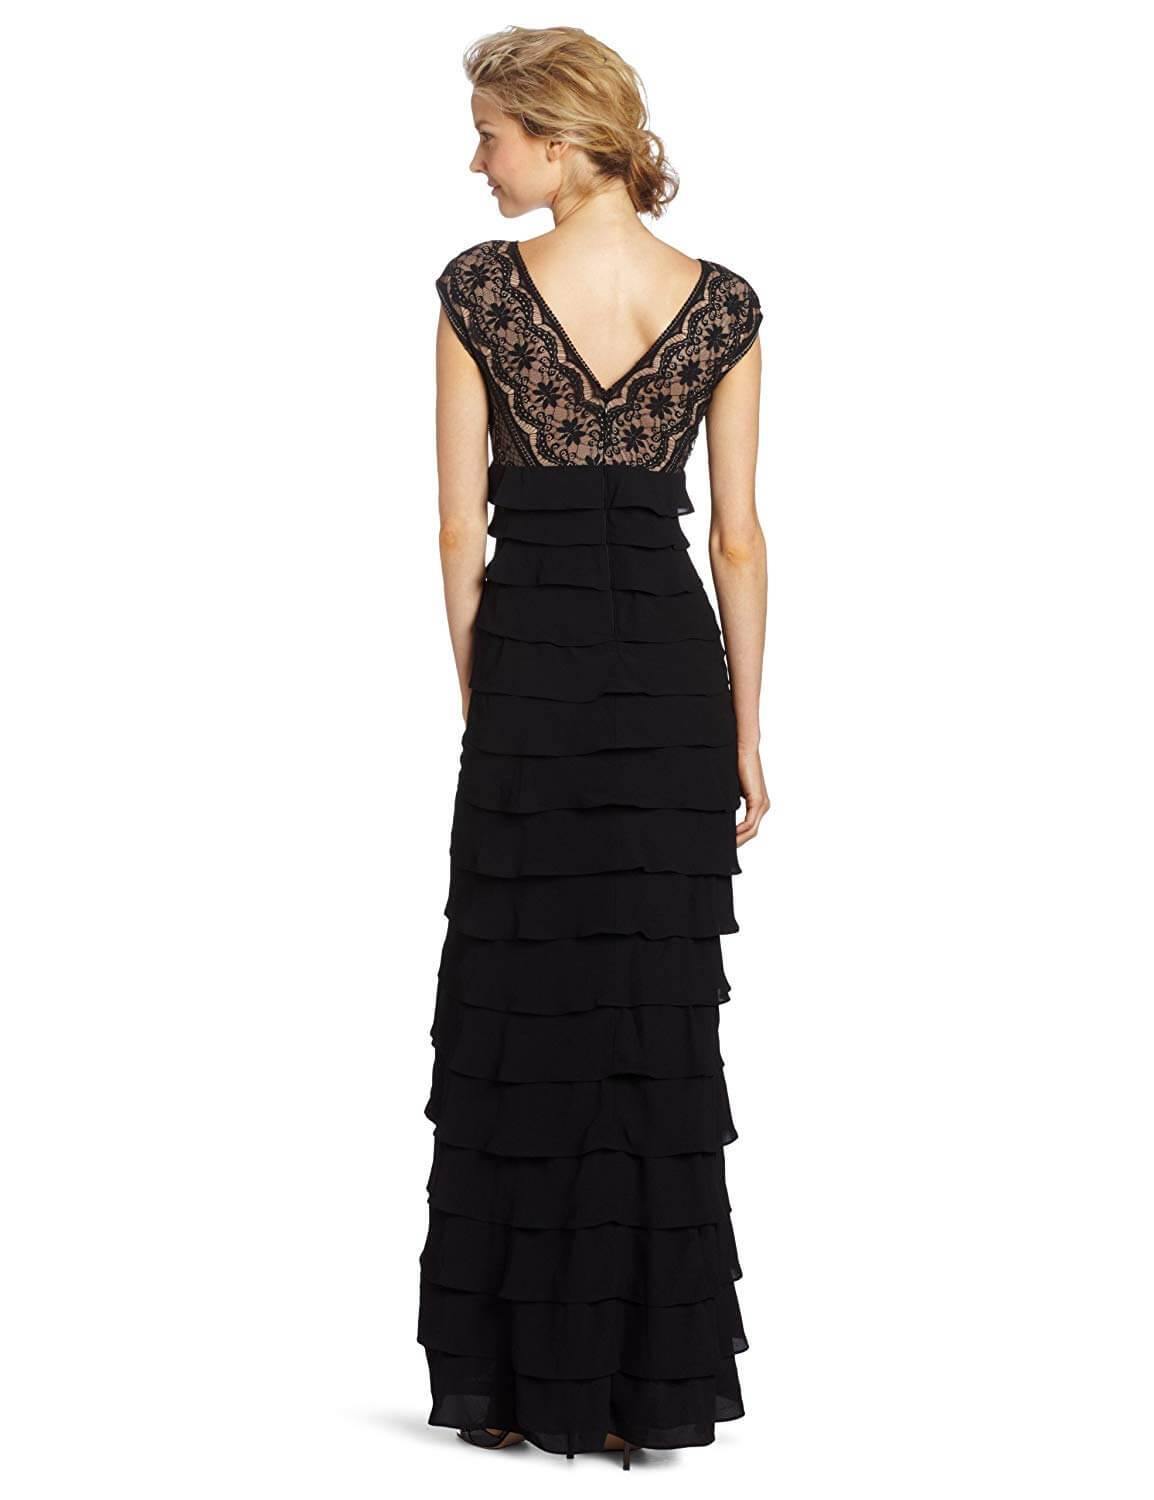 Adrianna Papell Cap Sleeve Long Formal Lace Dress - The Dress Outlet Adrianna Papell